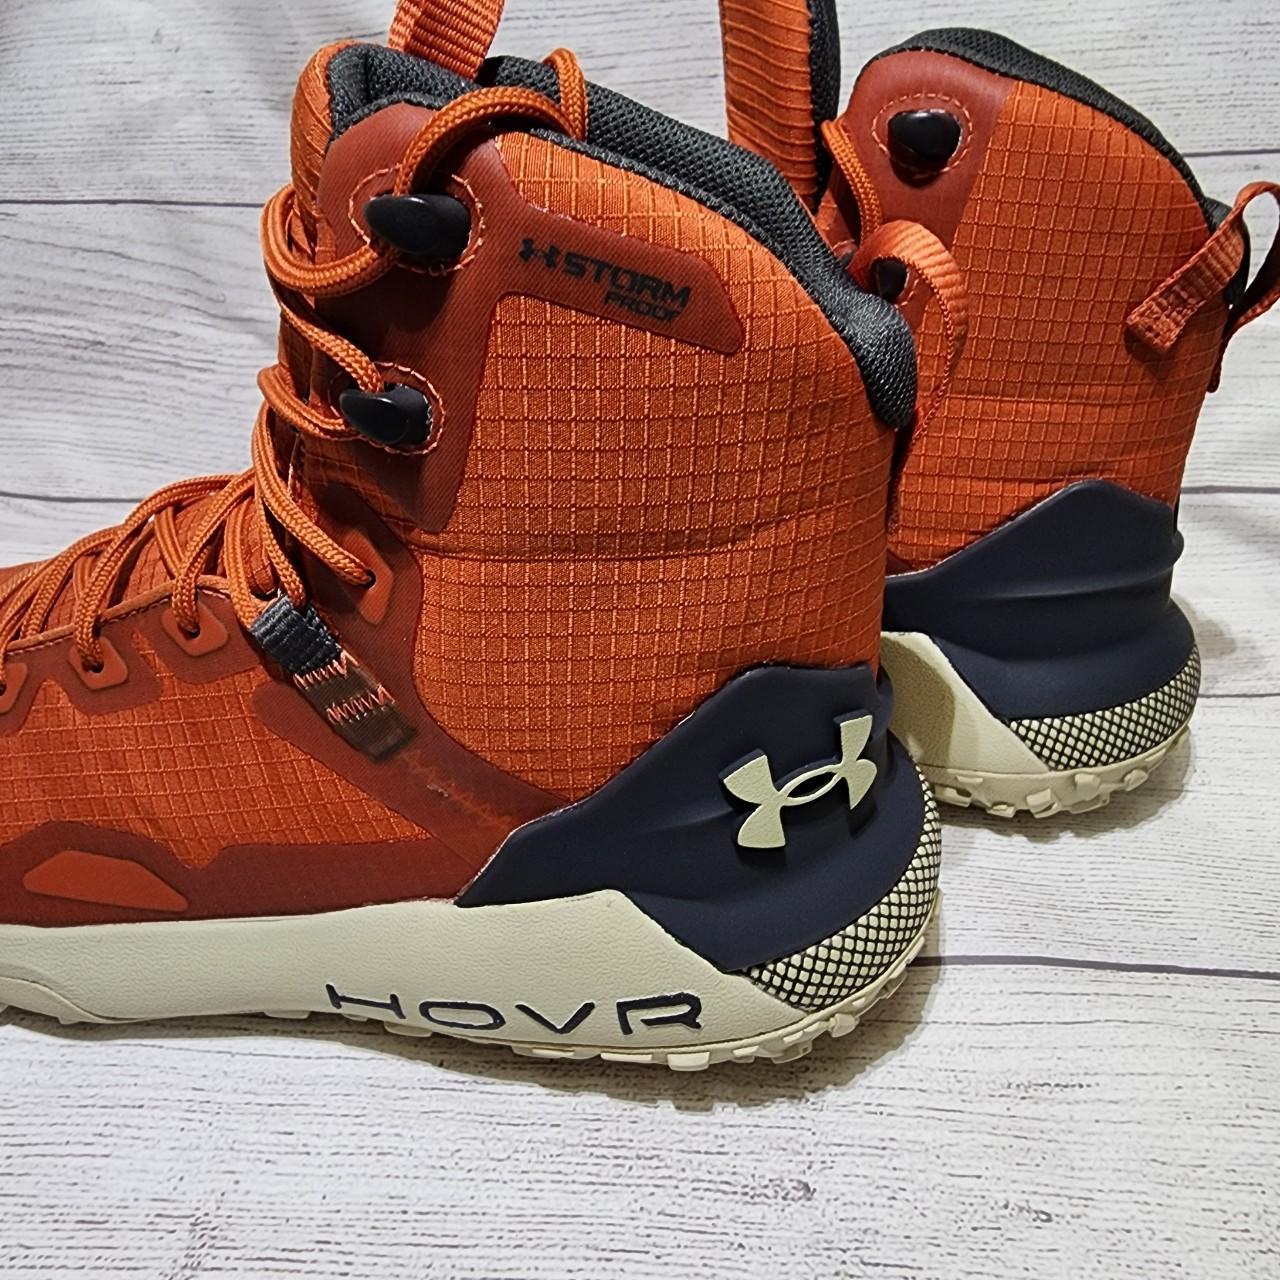 UA HOVR Dawn WP Boots Review - Man Makes Fire